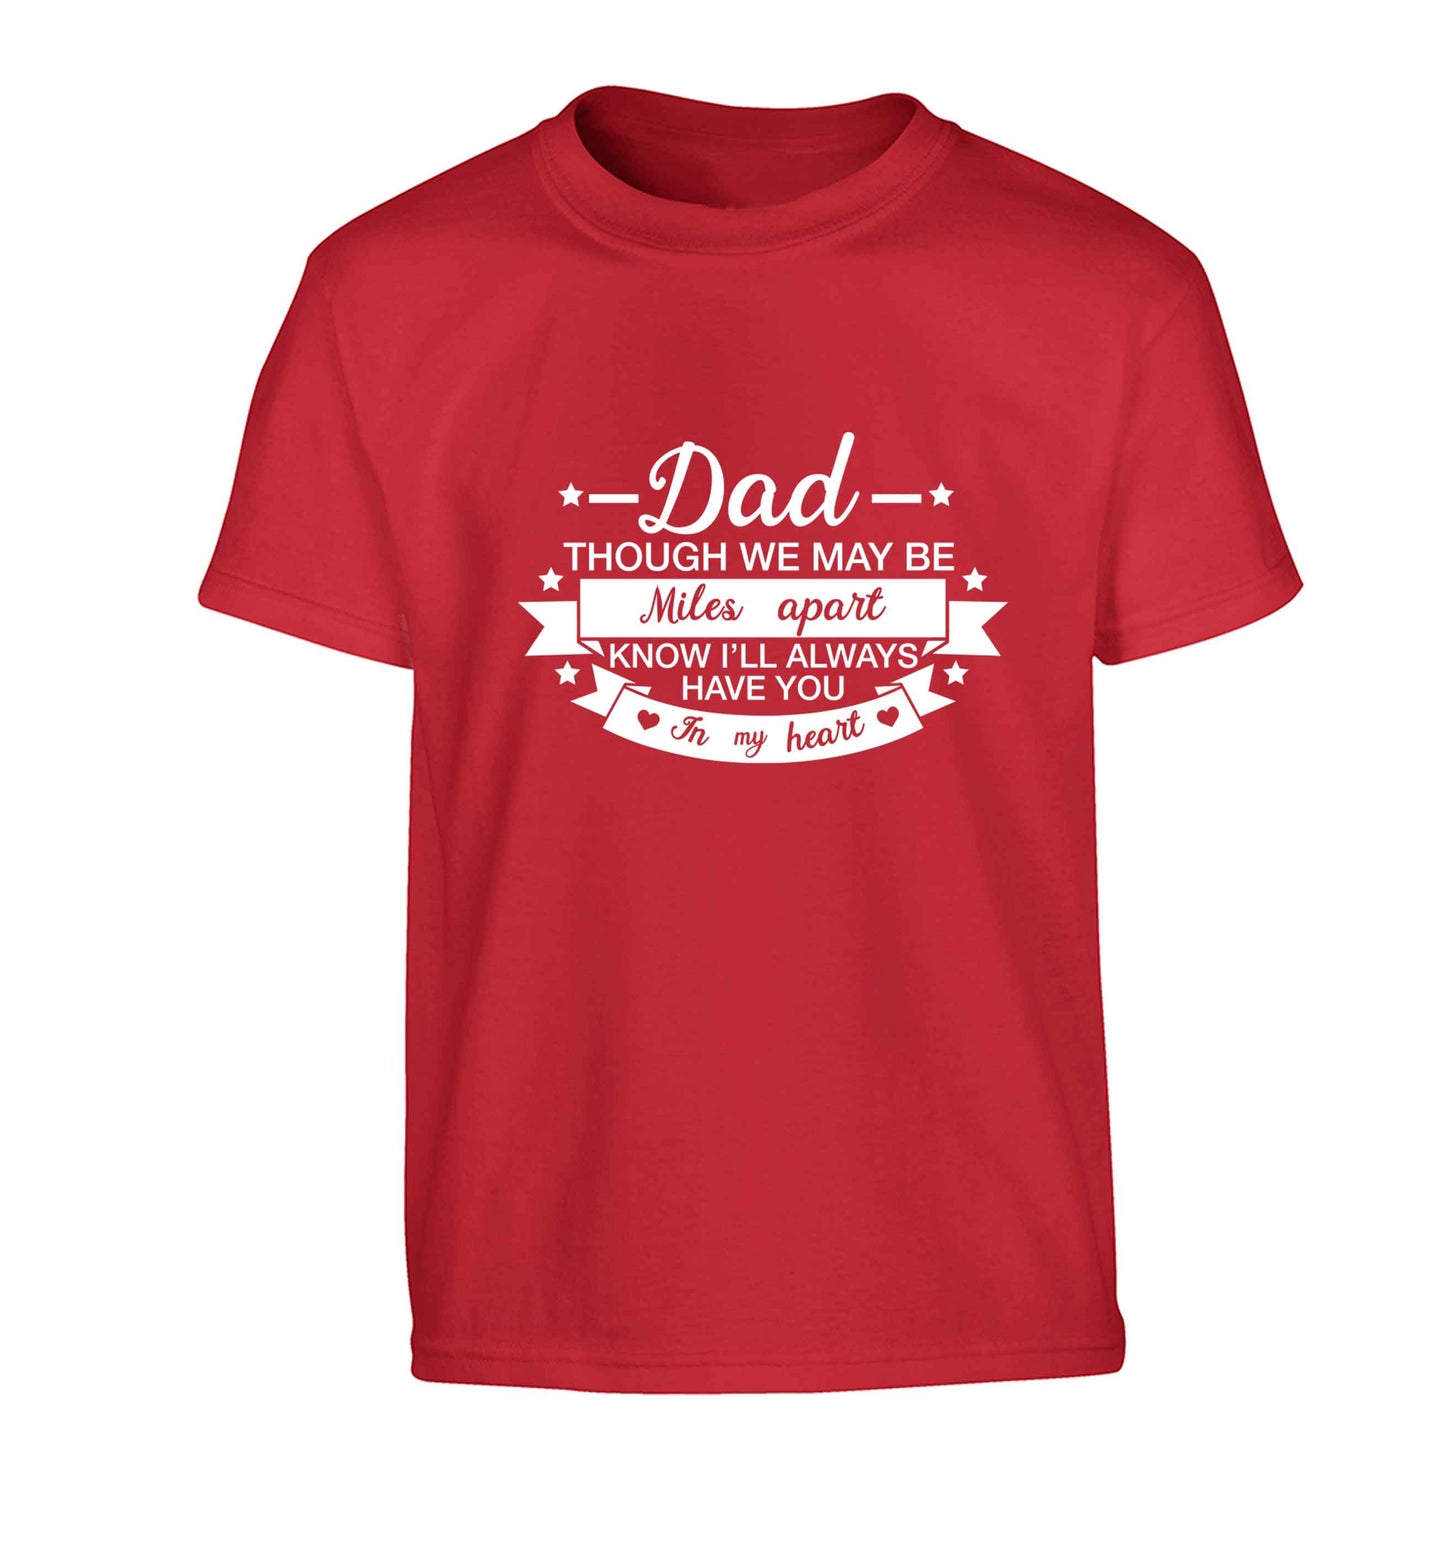 Dad though we are miles apart know I'll always have you in my heart Children's red Tshirt 12-13 Years